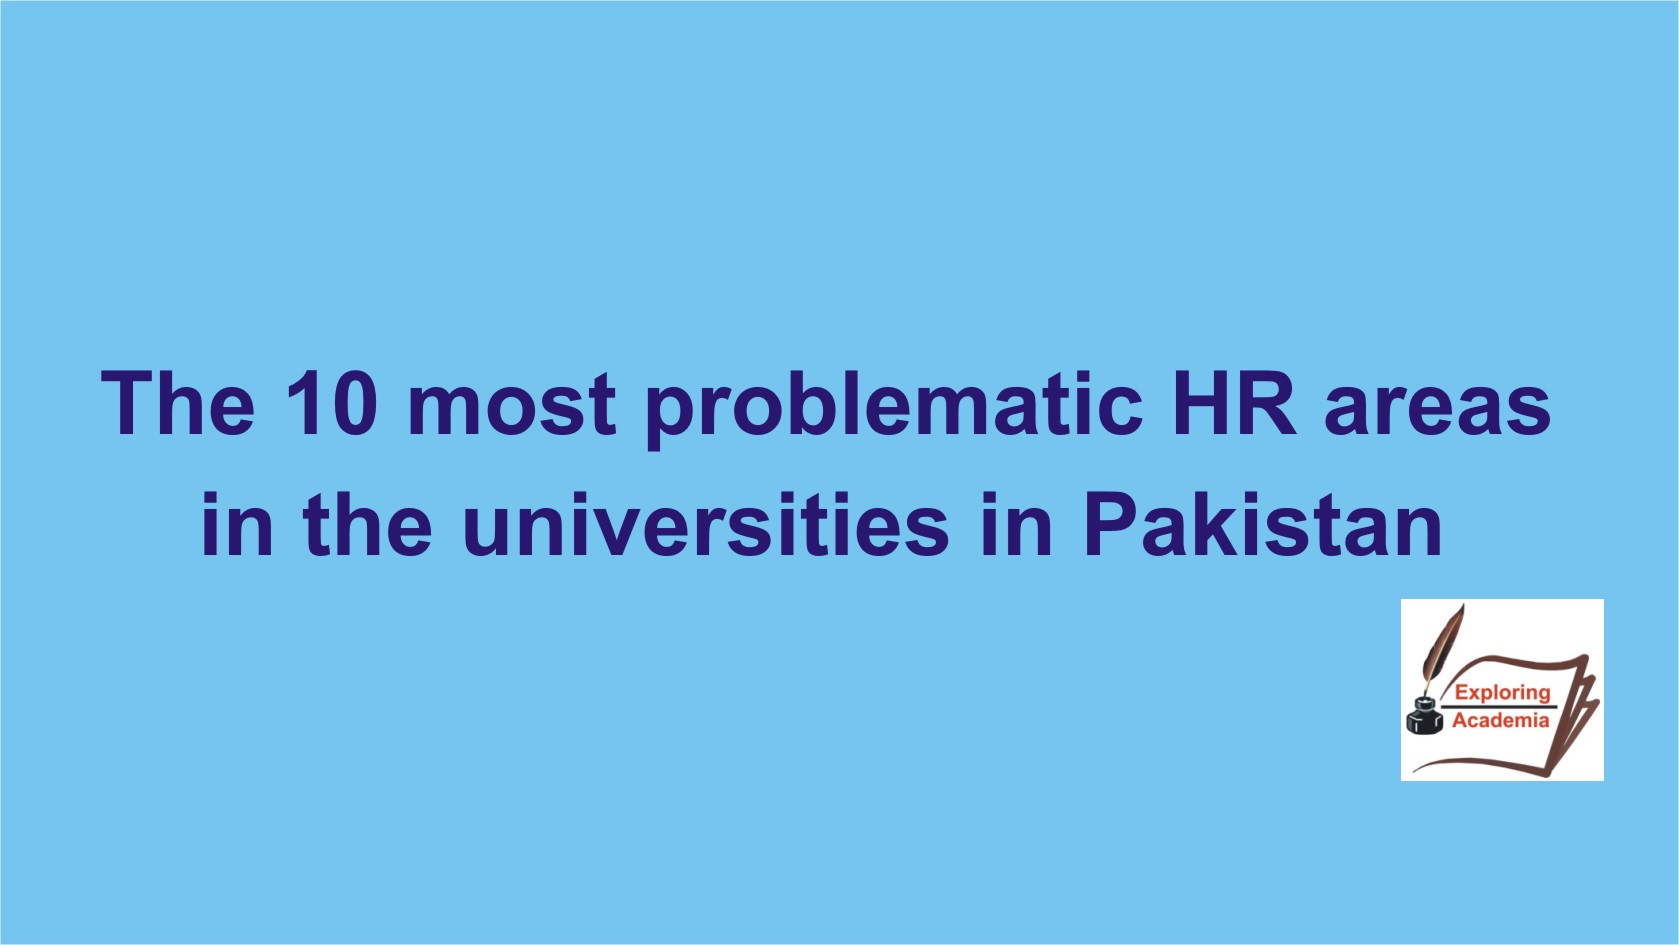 The 10 most problematic HR areas in the public sector universities in Pakistan